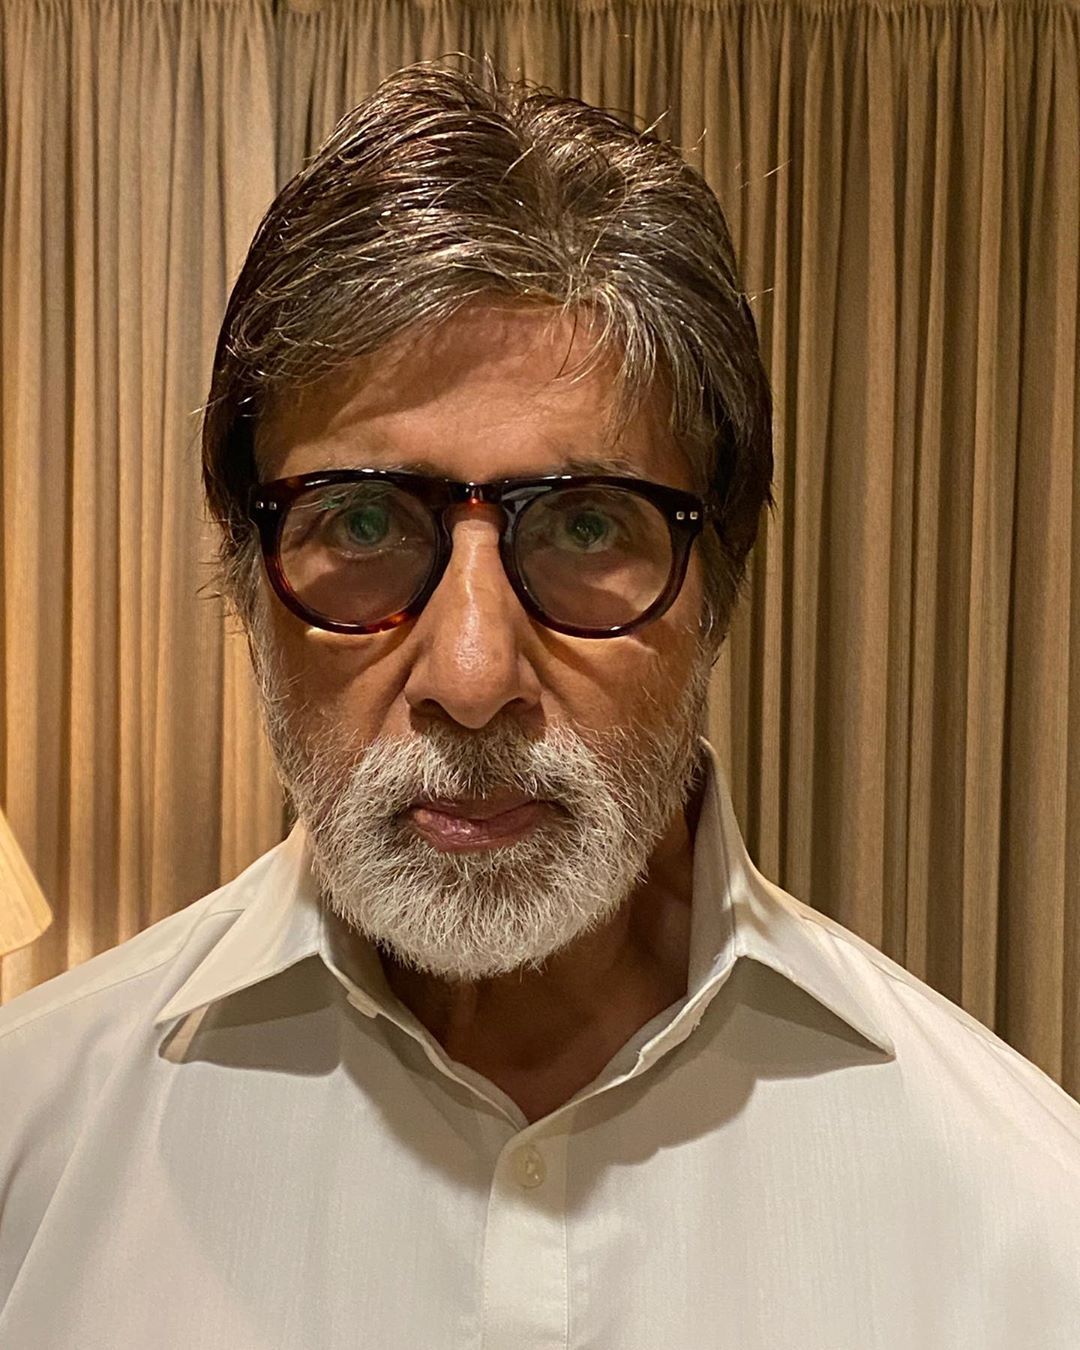 Amitabh Bachchan Calls Govt.'s Ban On Senior Actors 'Discriminatory', Says It's 'Packers Then' For People Like Him